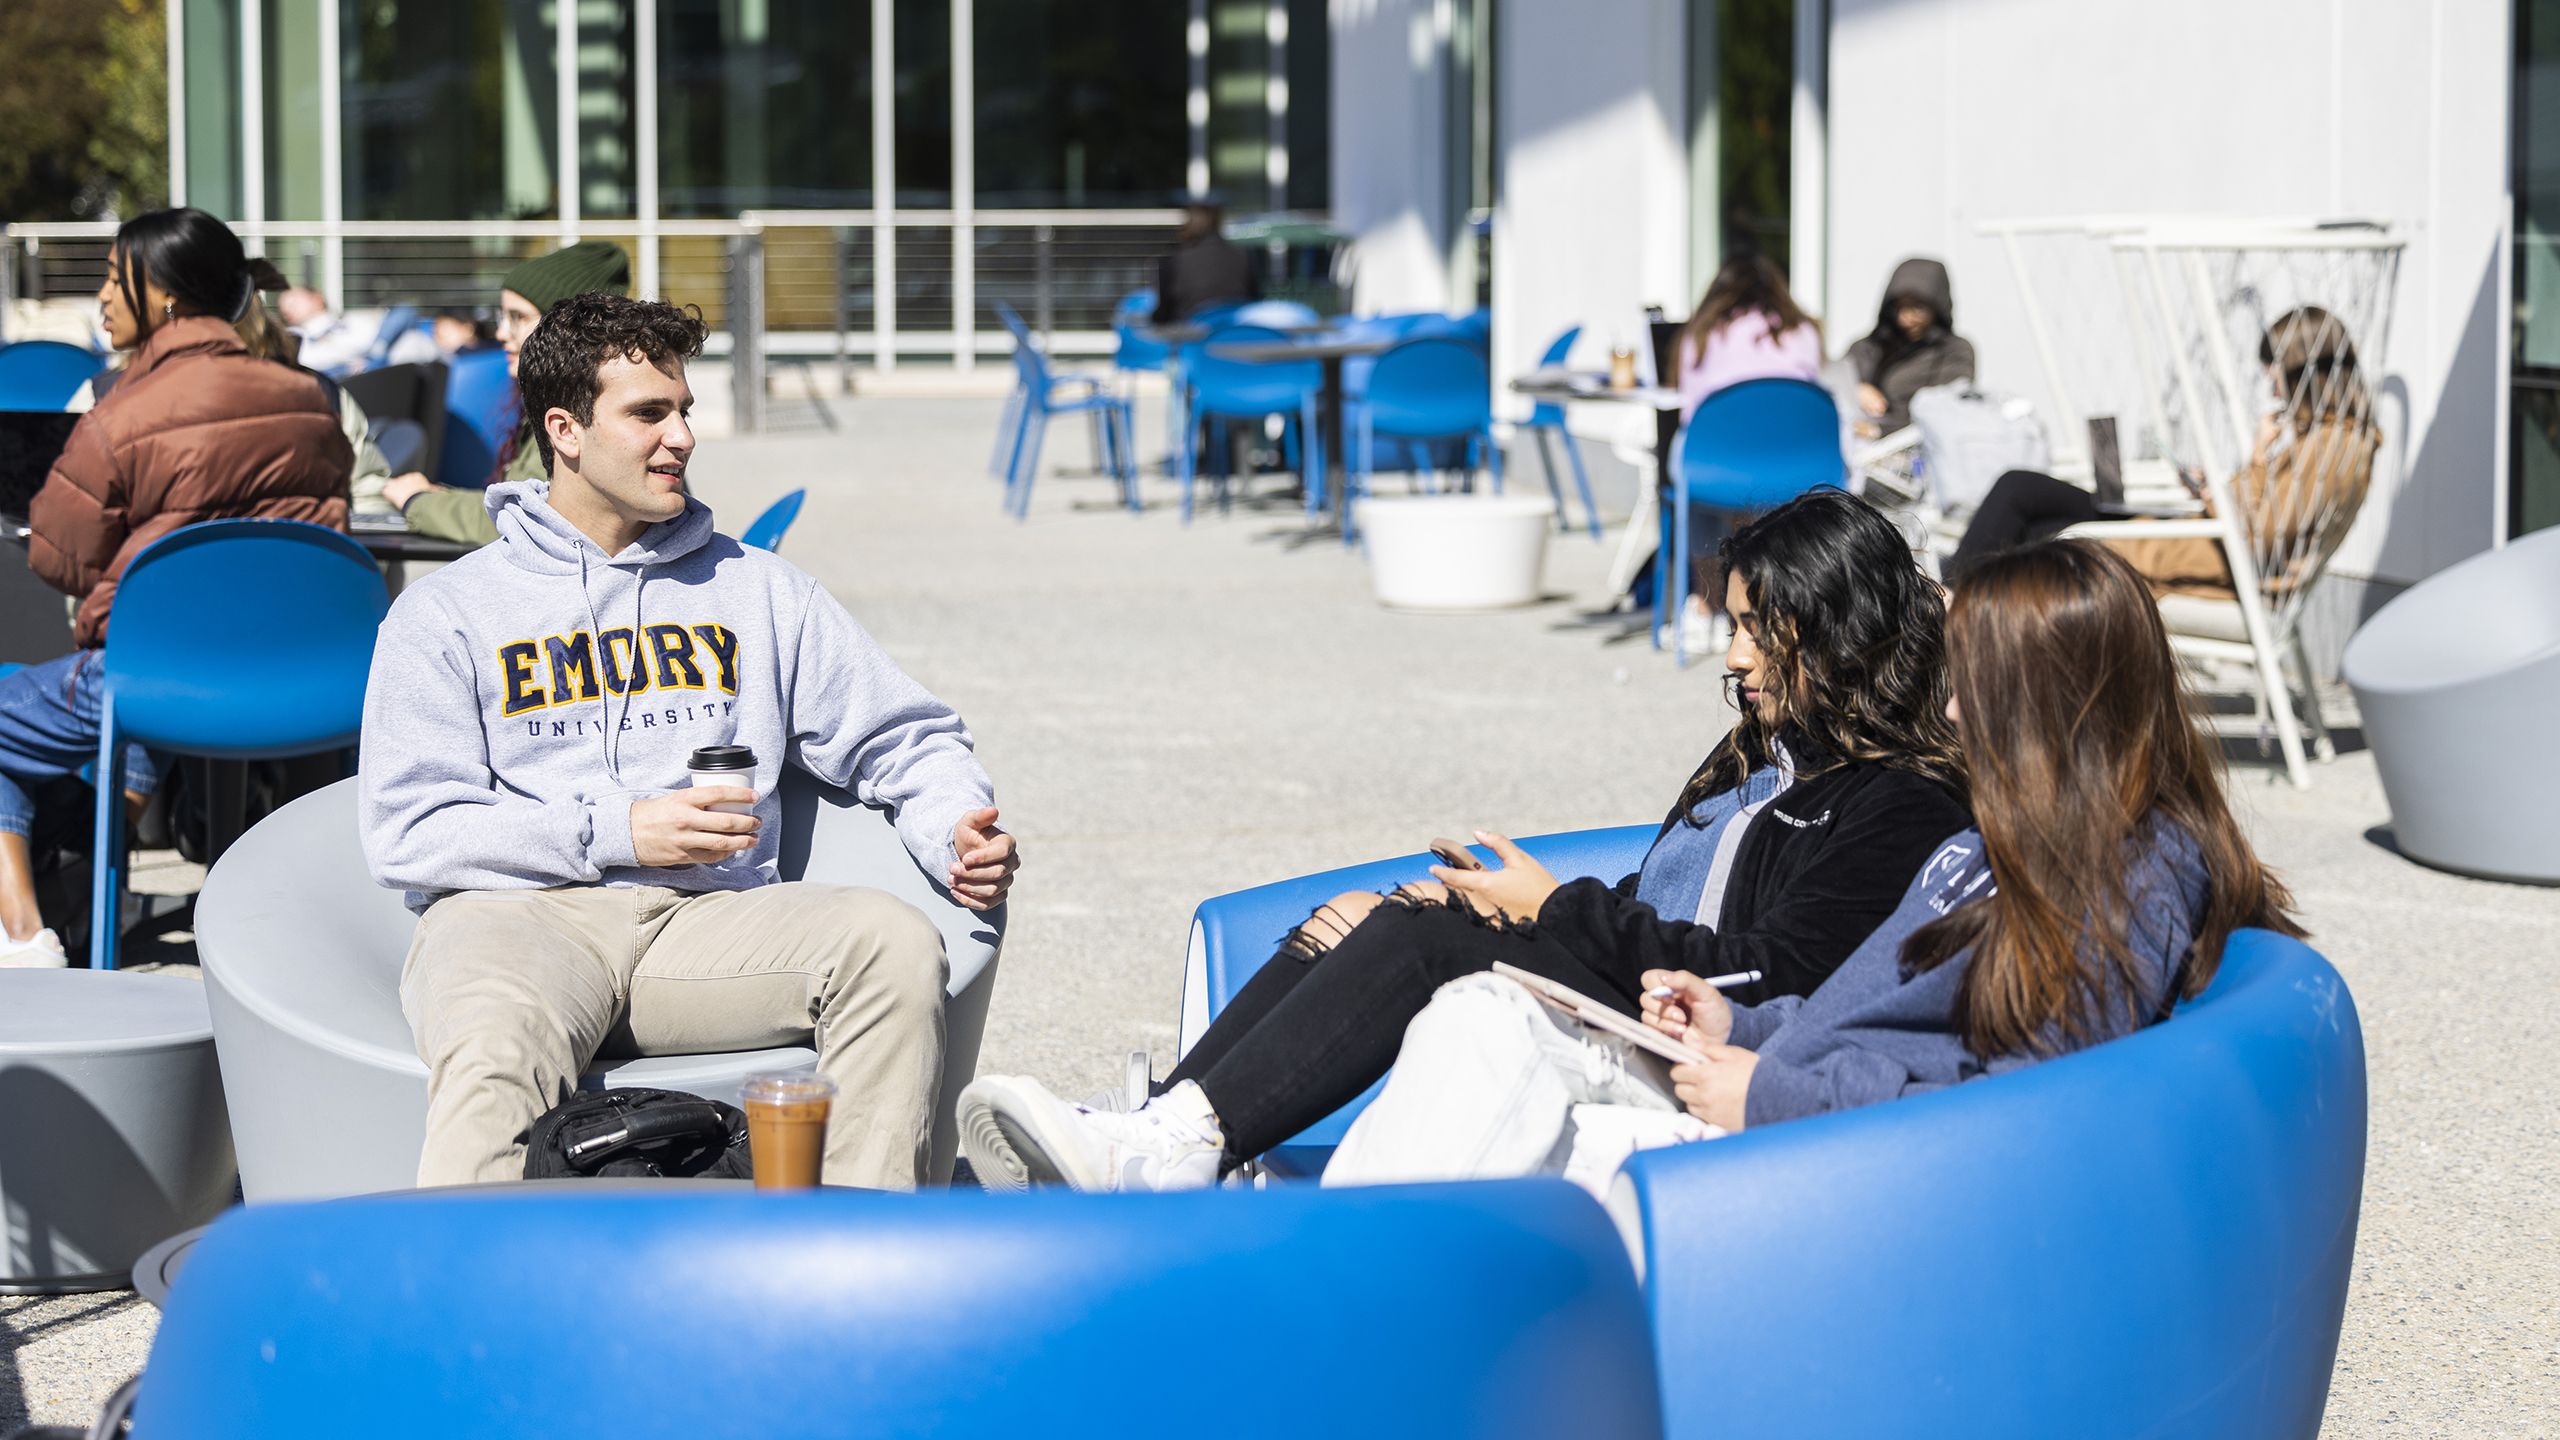 Emory admits 245 more students to Class of 2027 in ED2, garnering